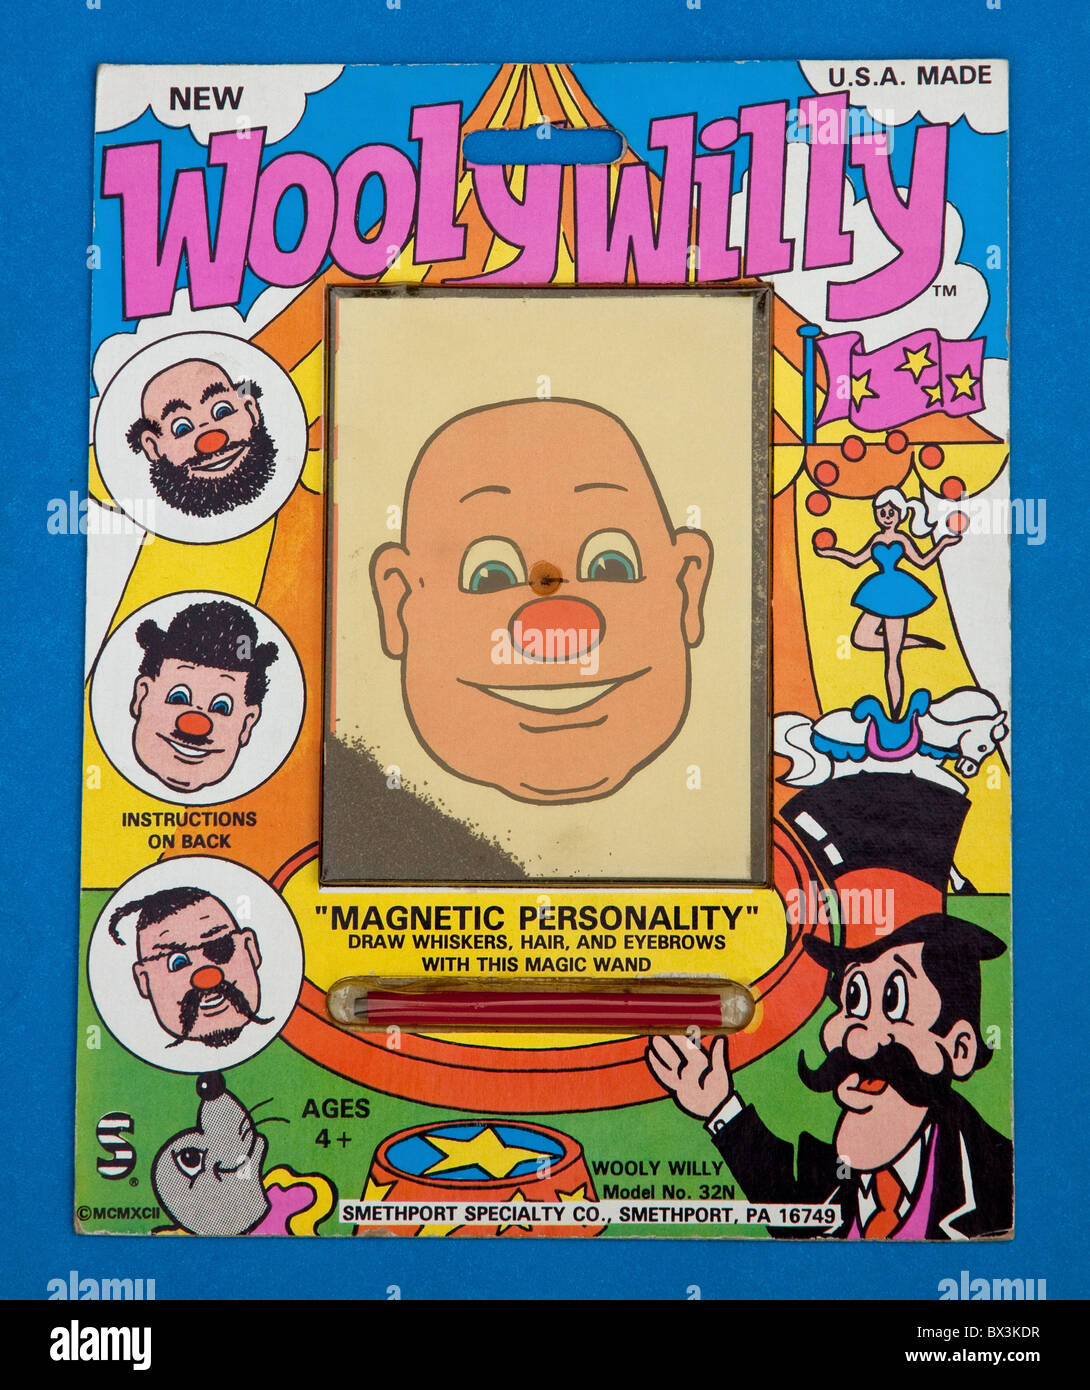 Wooly Willy toy that uses magnetic filings  to put hair on a man's cartoon face. Stock Photo